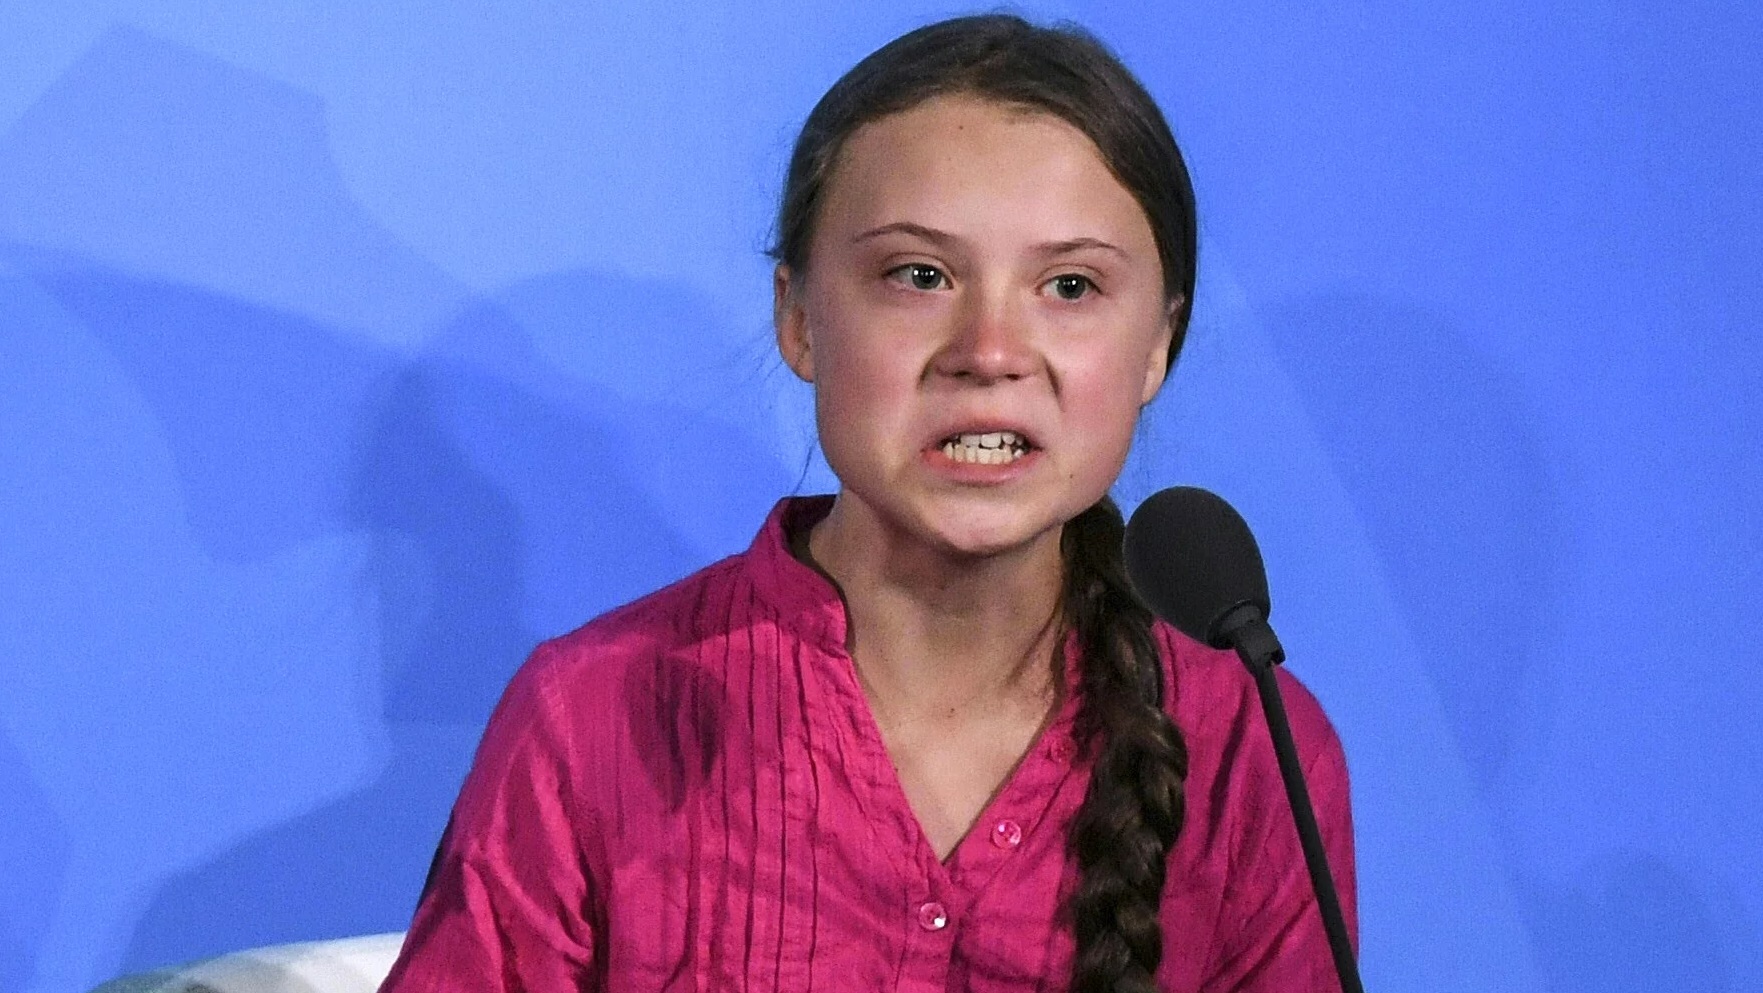 Image: Observers shocked at Greta Thunberg’s inability to answer a simple question without a script